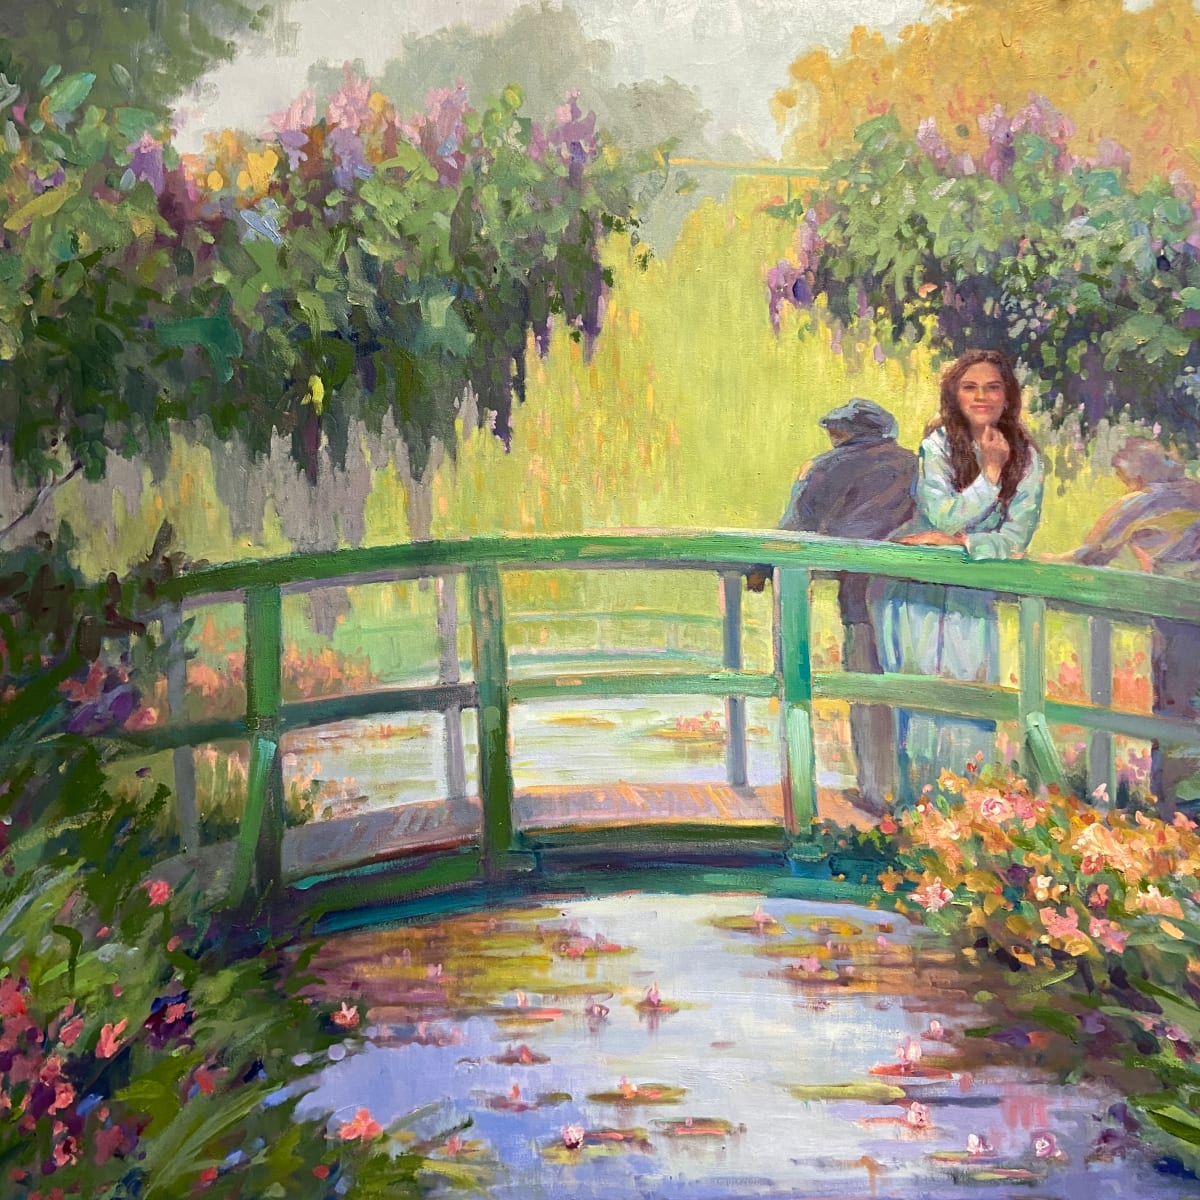 Moment  at Monet's Garden by Linda Richichi  Image: A Monet Moment (this was the first title)